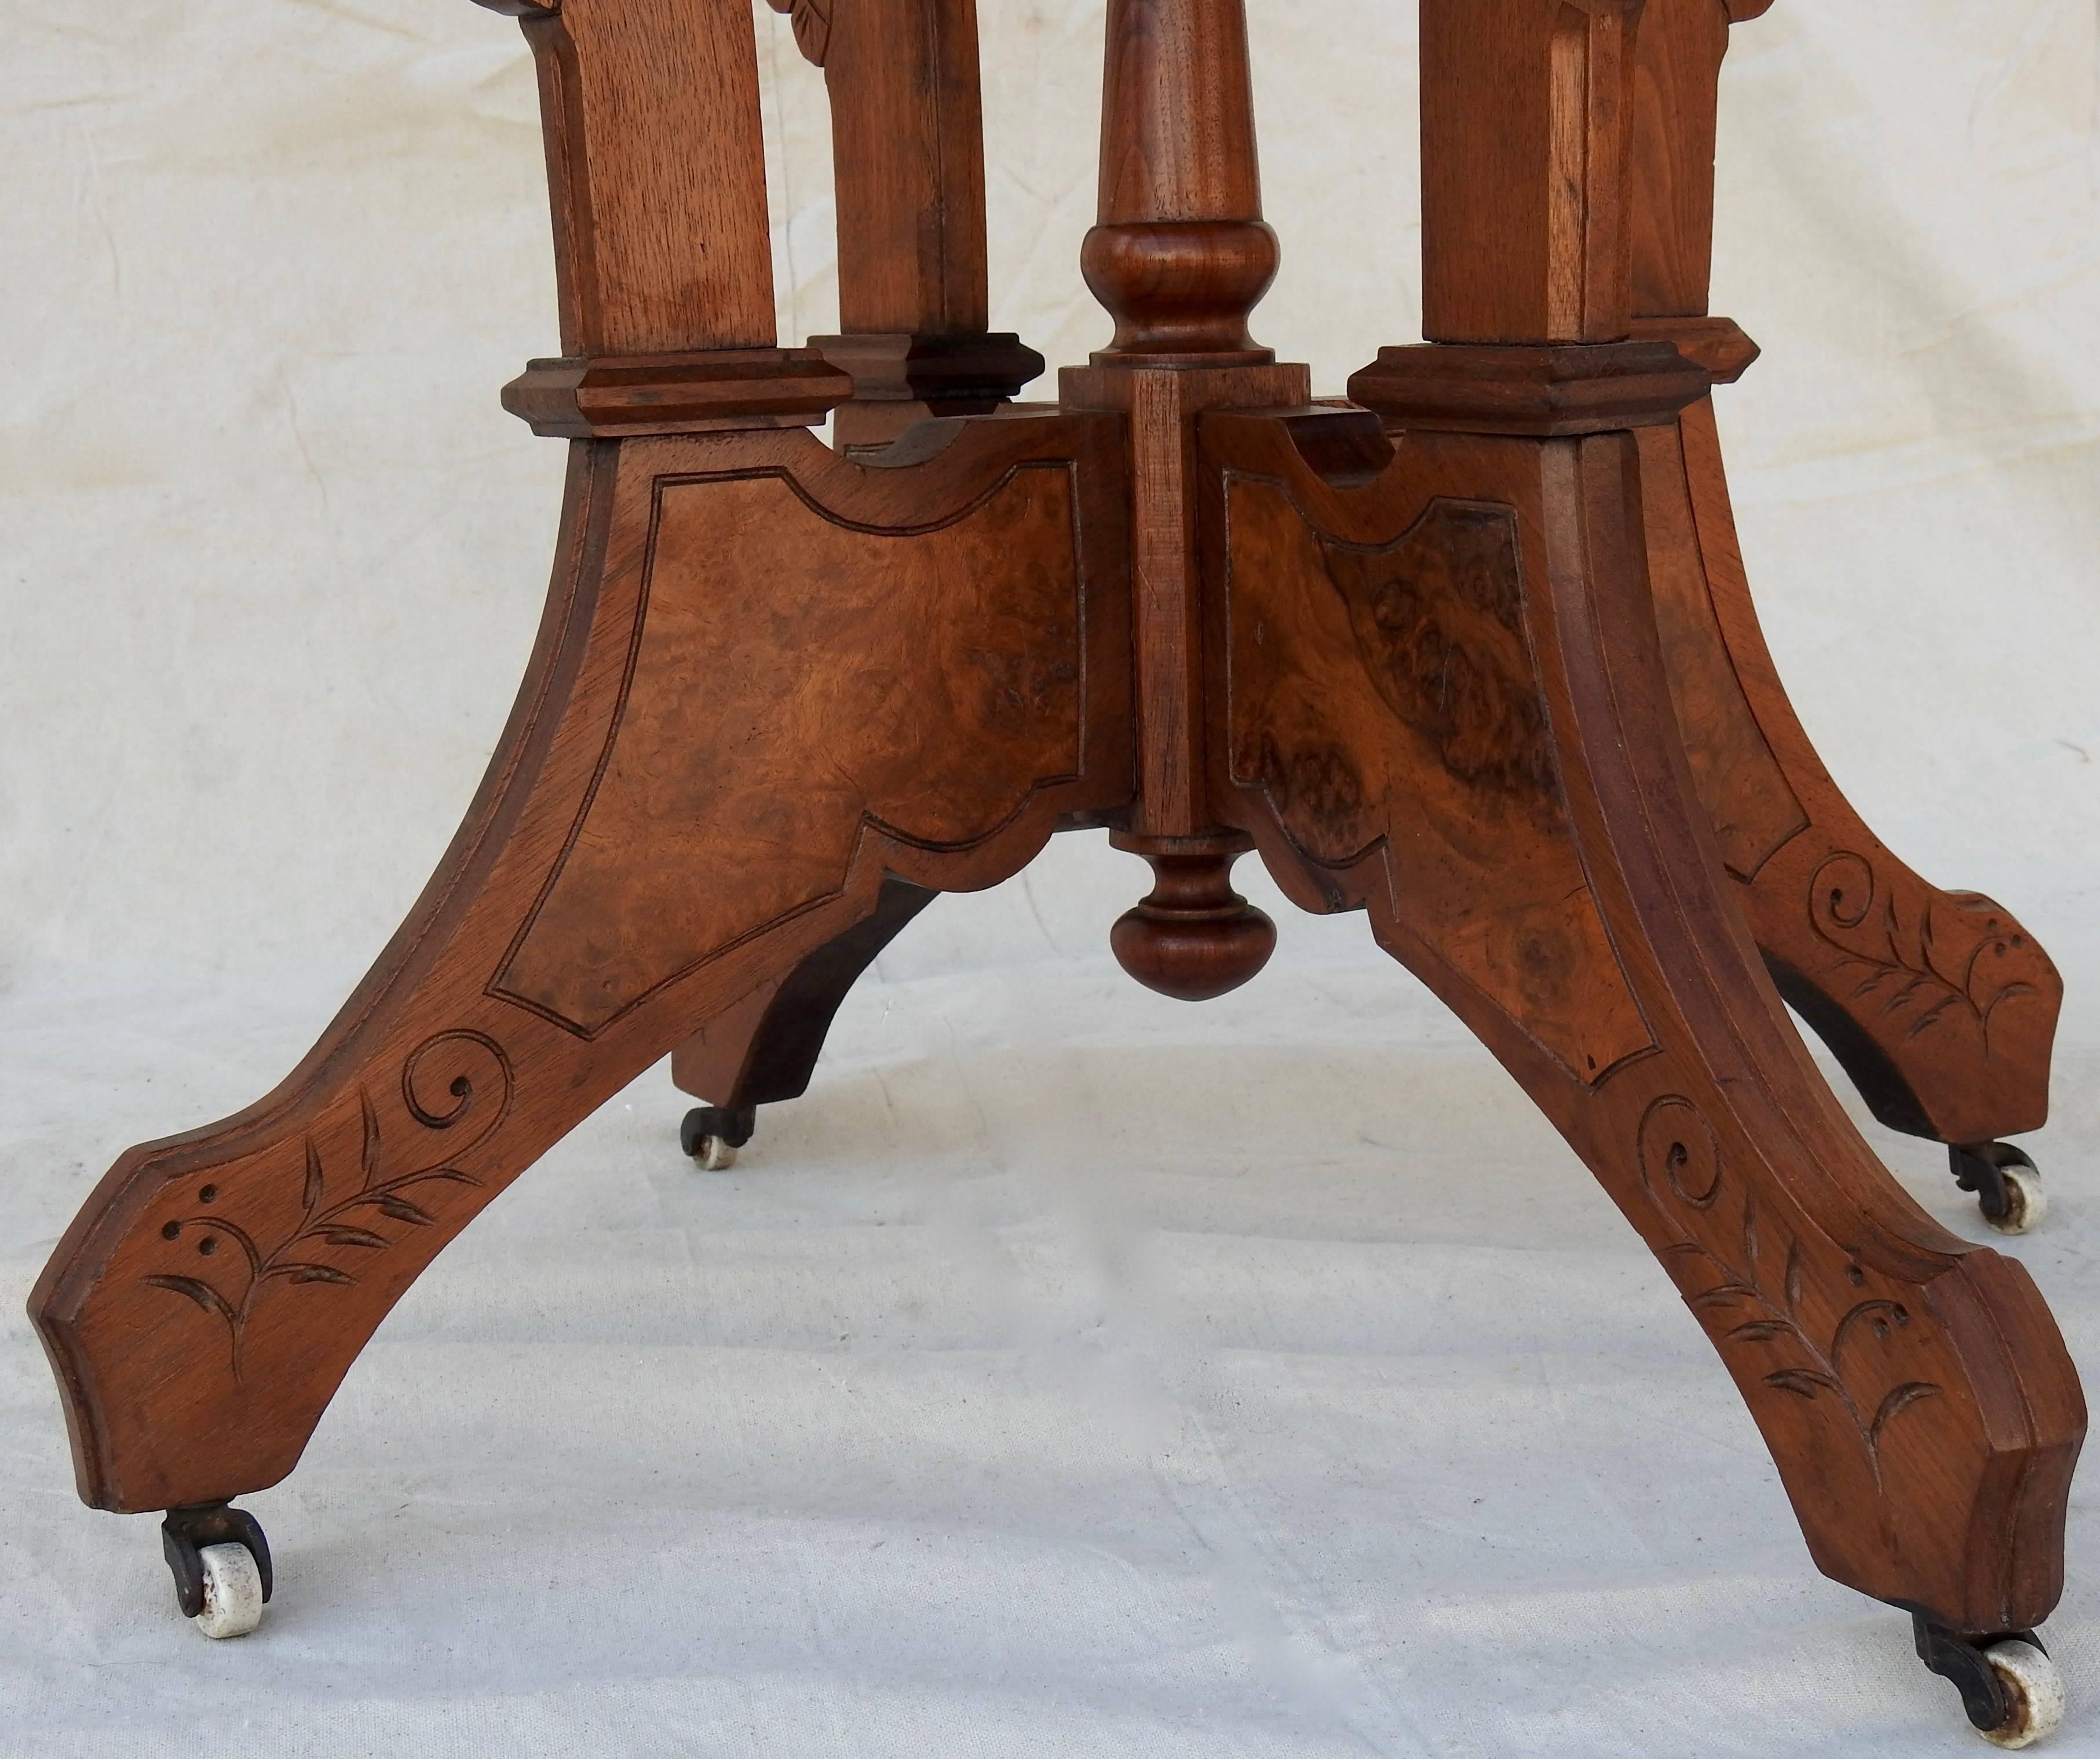 Offering this gorgeous Victorian burled walnut Eastlake table. The lightly carved wood is done in simple geometric patters with some foliate and scrollwork designs. There are four main legs that all meet in the center with a hand-turned spindle. The